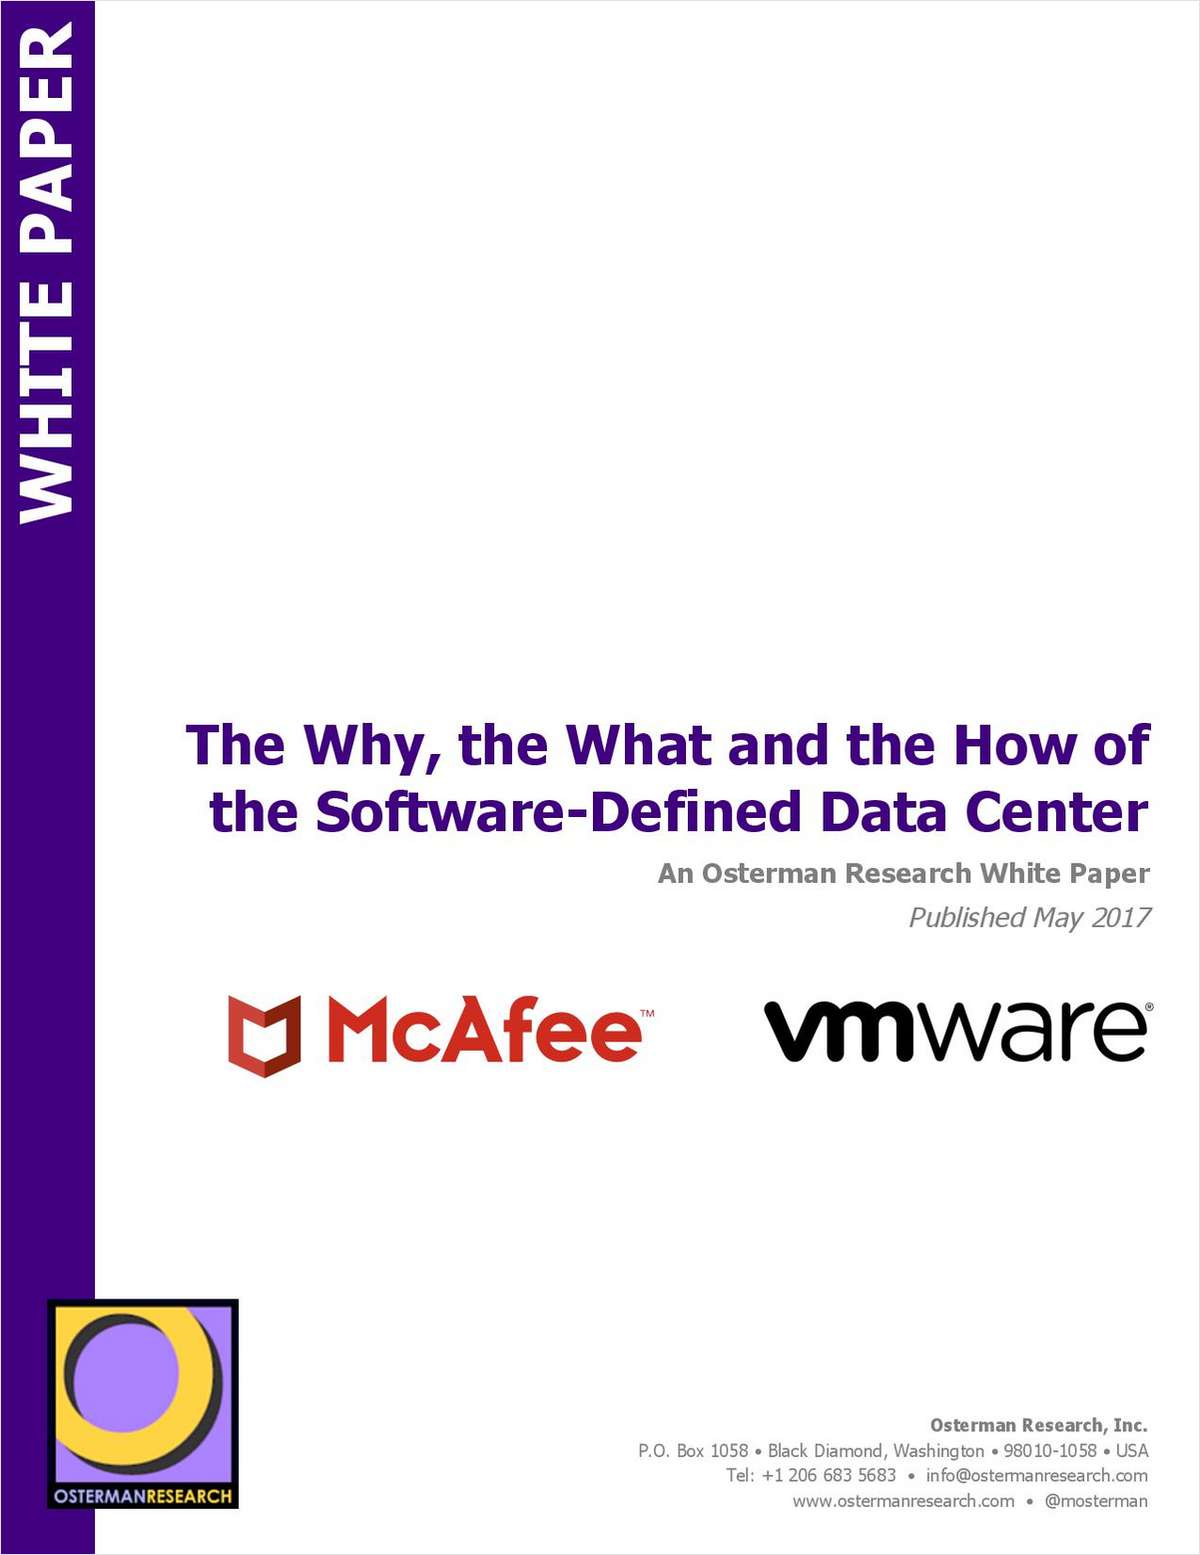 The Why, the What and the How of the Software-Defined Data Center: An Osterman Research White Paper